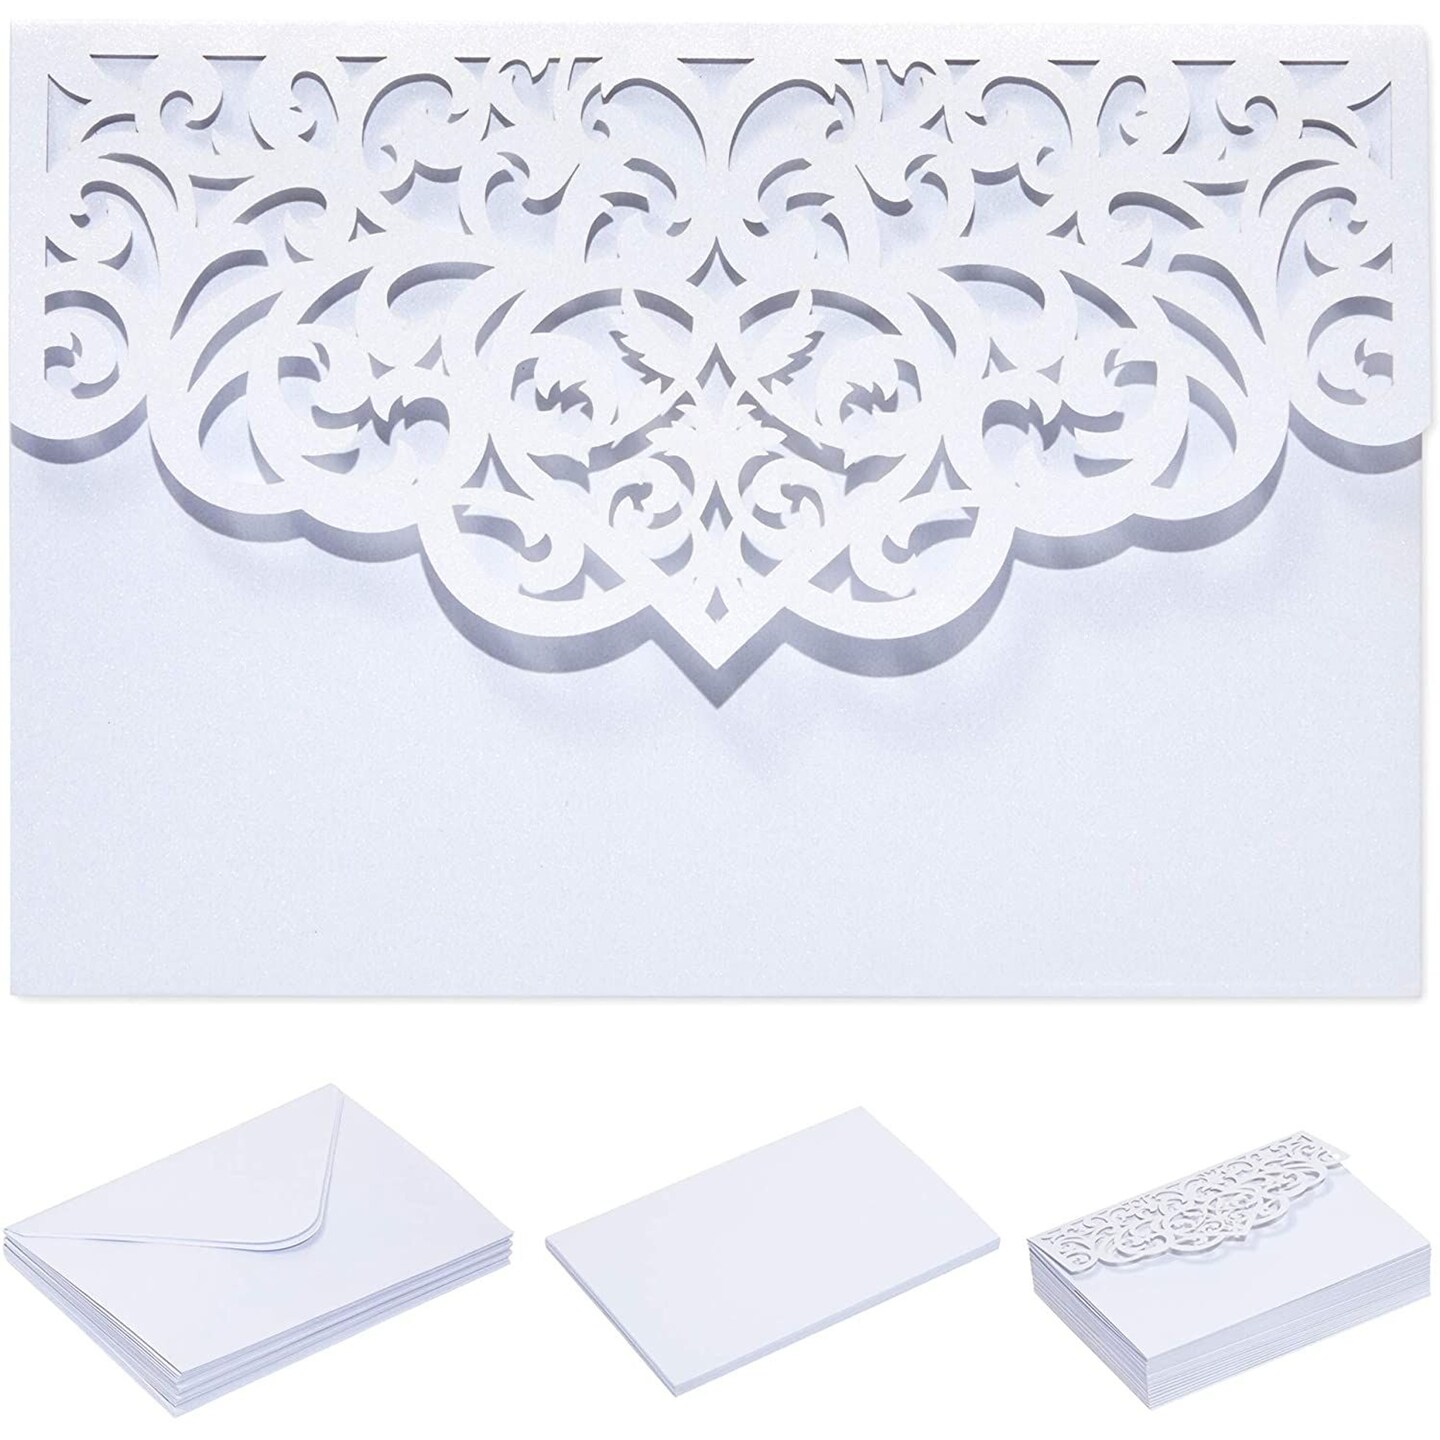 Laser Cut Ivory Lace Blank Invitations with Envelopes, 5 x 7.25